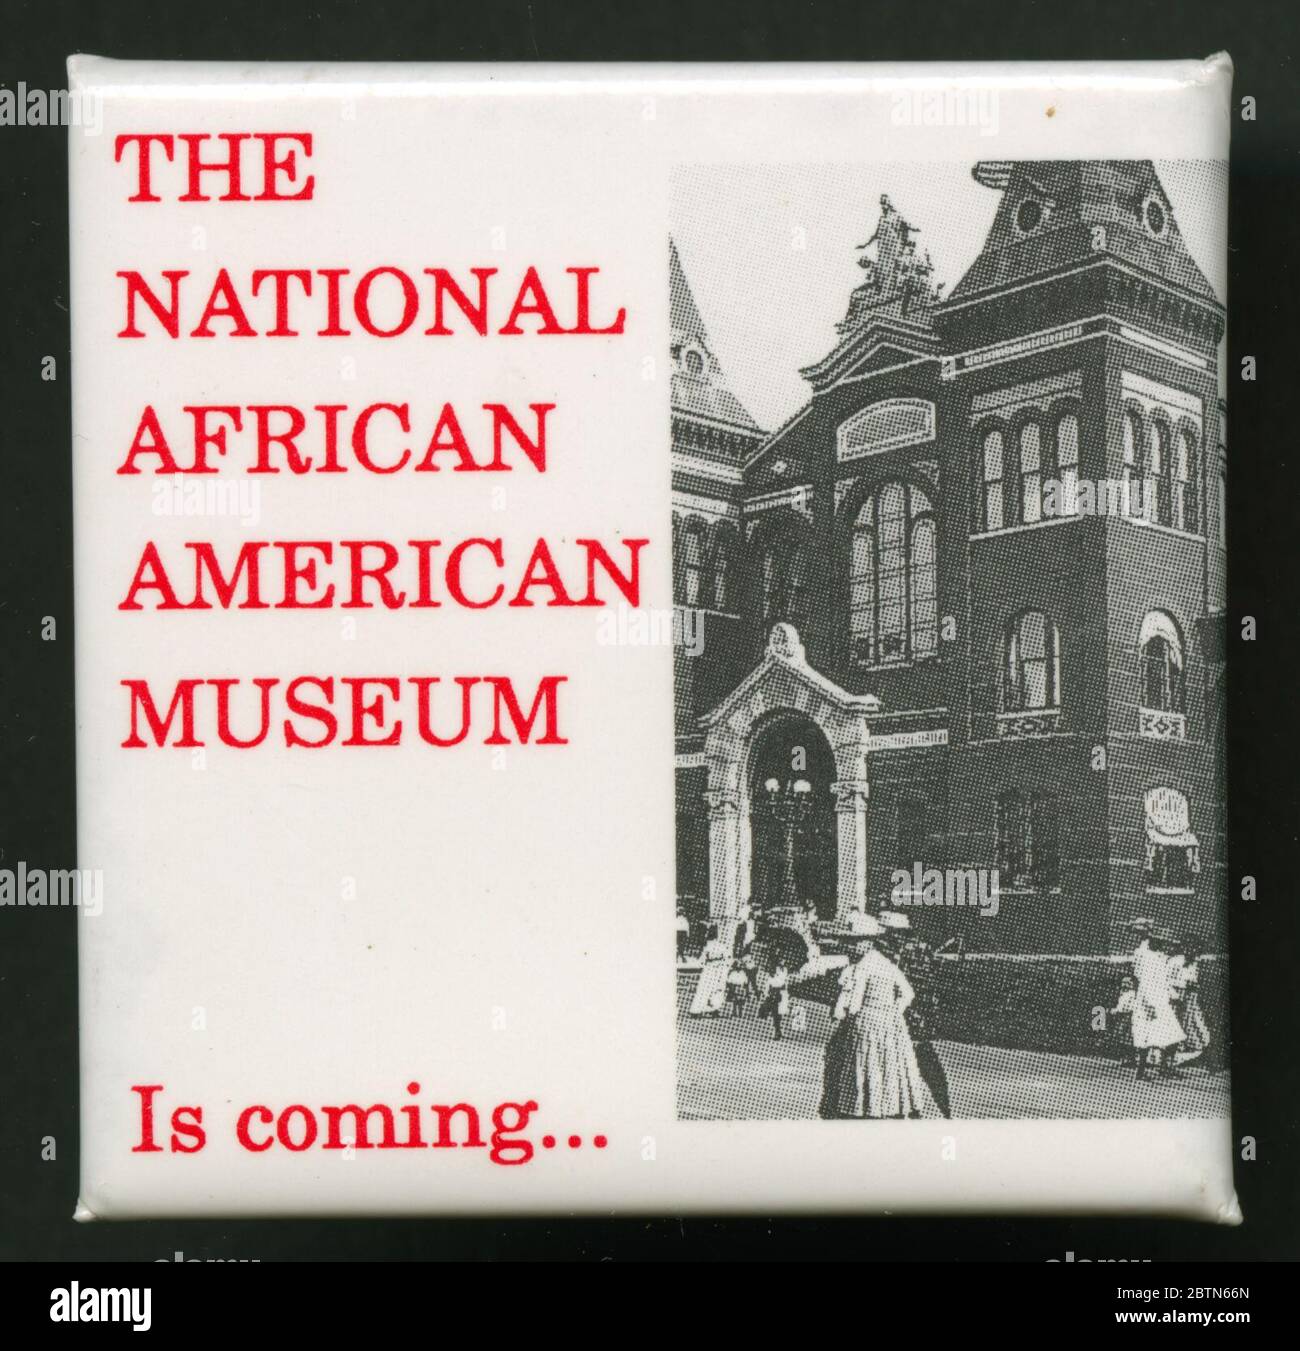 Pinback button promoting the arrival of the National African American Museum. Square pin-back button featuring a black and white image of the Smithsonian Arts and Industries building. To the left of the black and white photograph is red type that reads, [THE/NATIONAL/AFRICAN/AMERICAN/MUSEUM/Is coming…]. Stock Photo